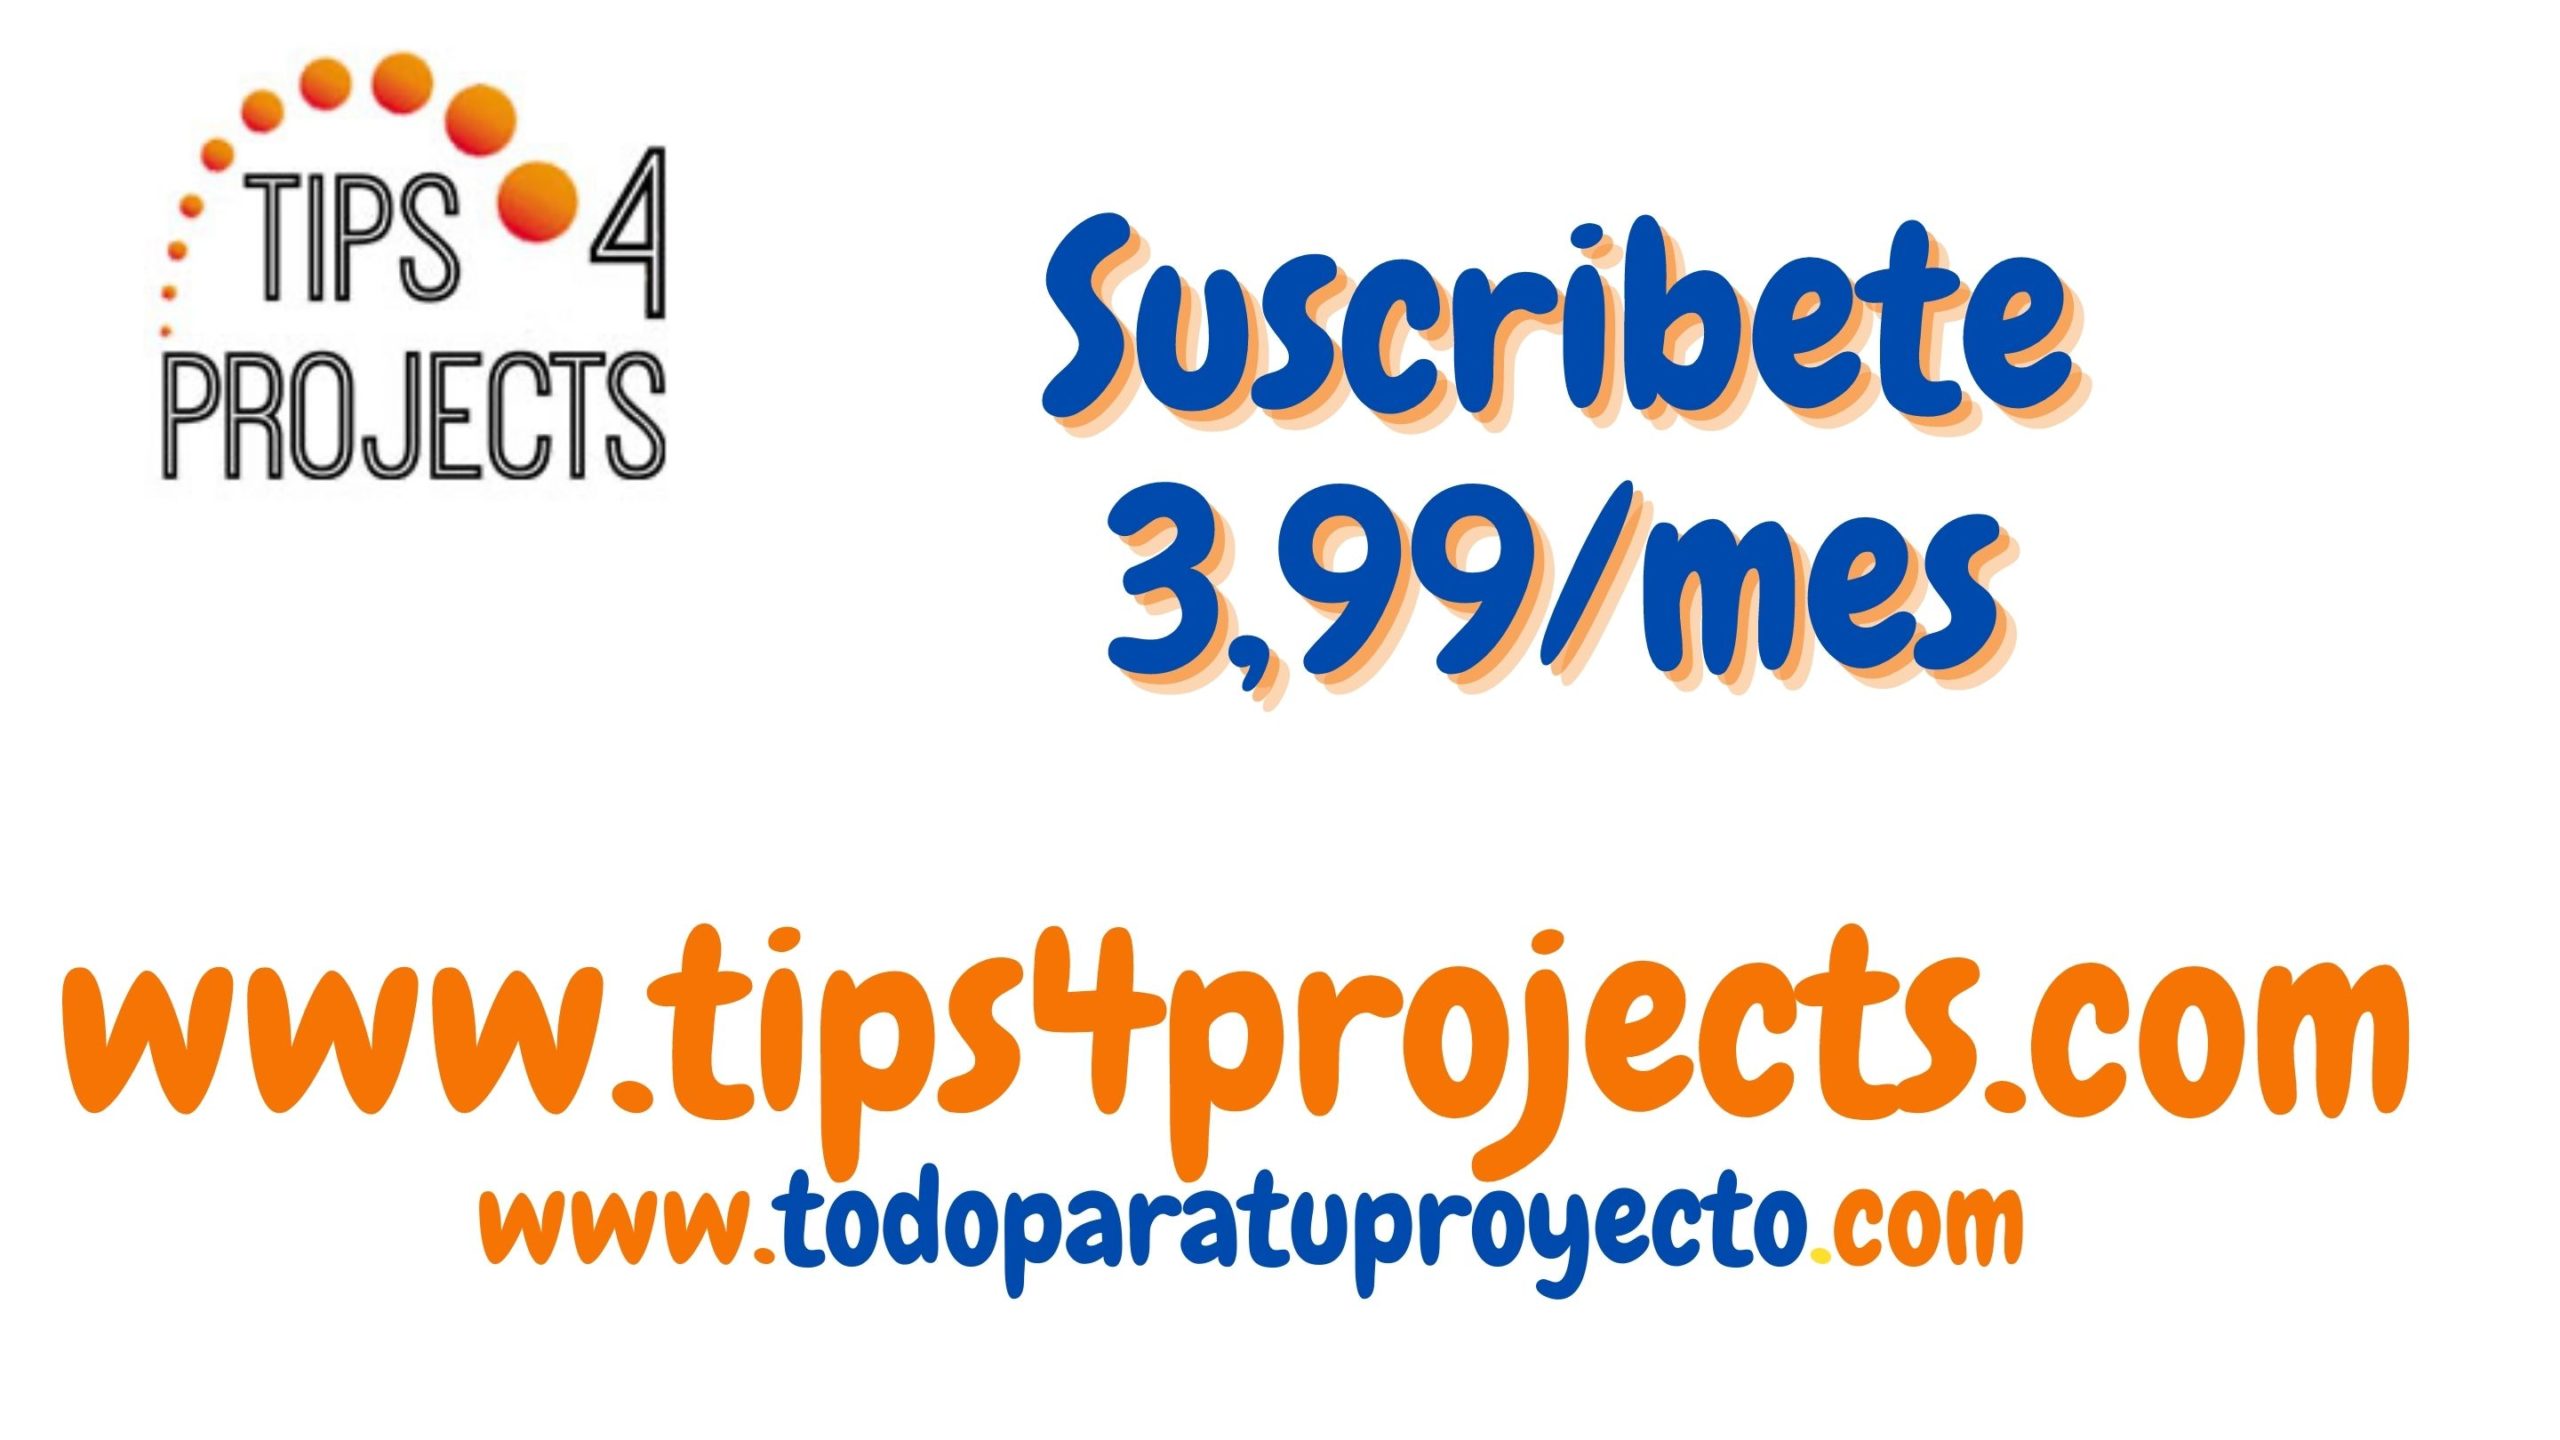 tips4projects abo 1